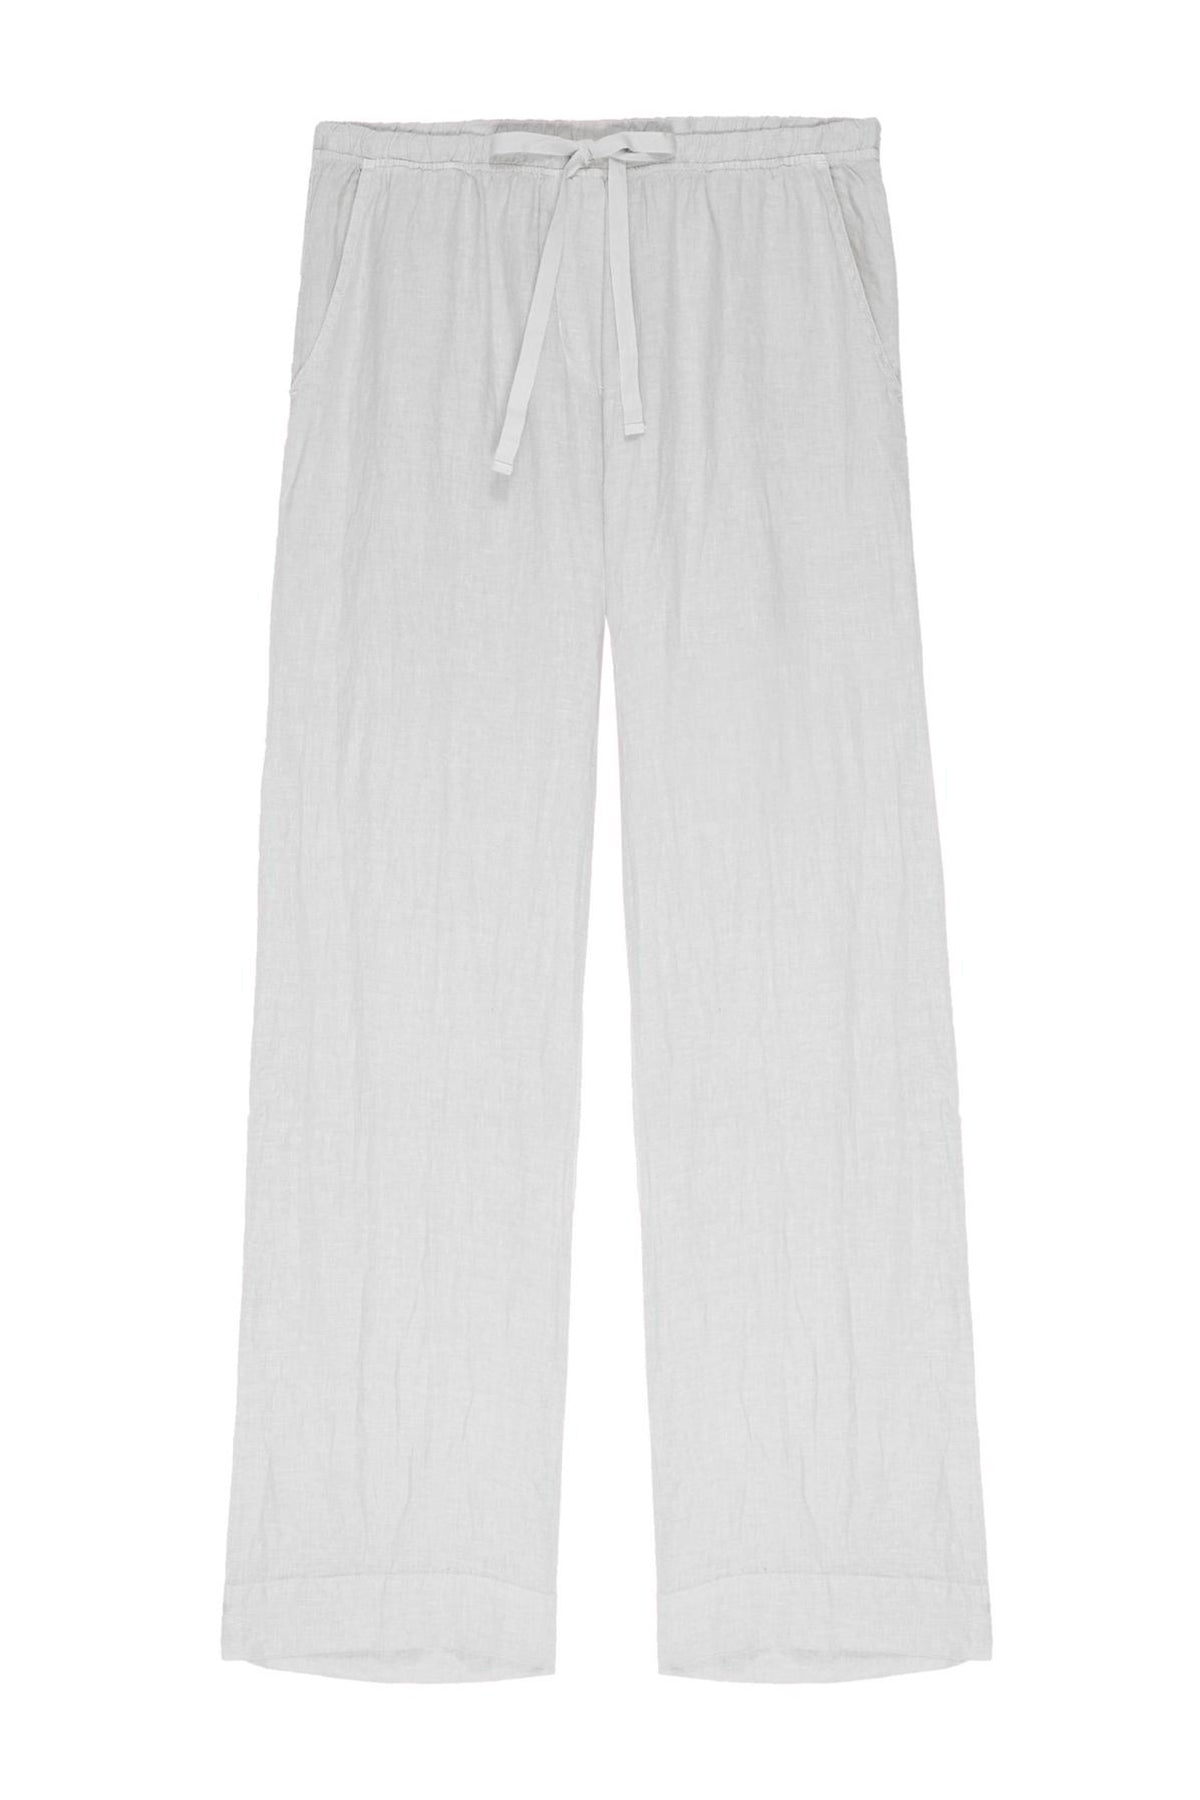 Light gray linen PICO PANTS with an elastic waist, displayed on a plain white background, by Velvet by Jenny Graham.-36580165484737